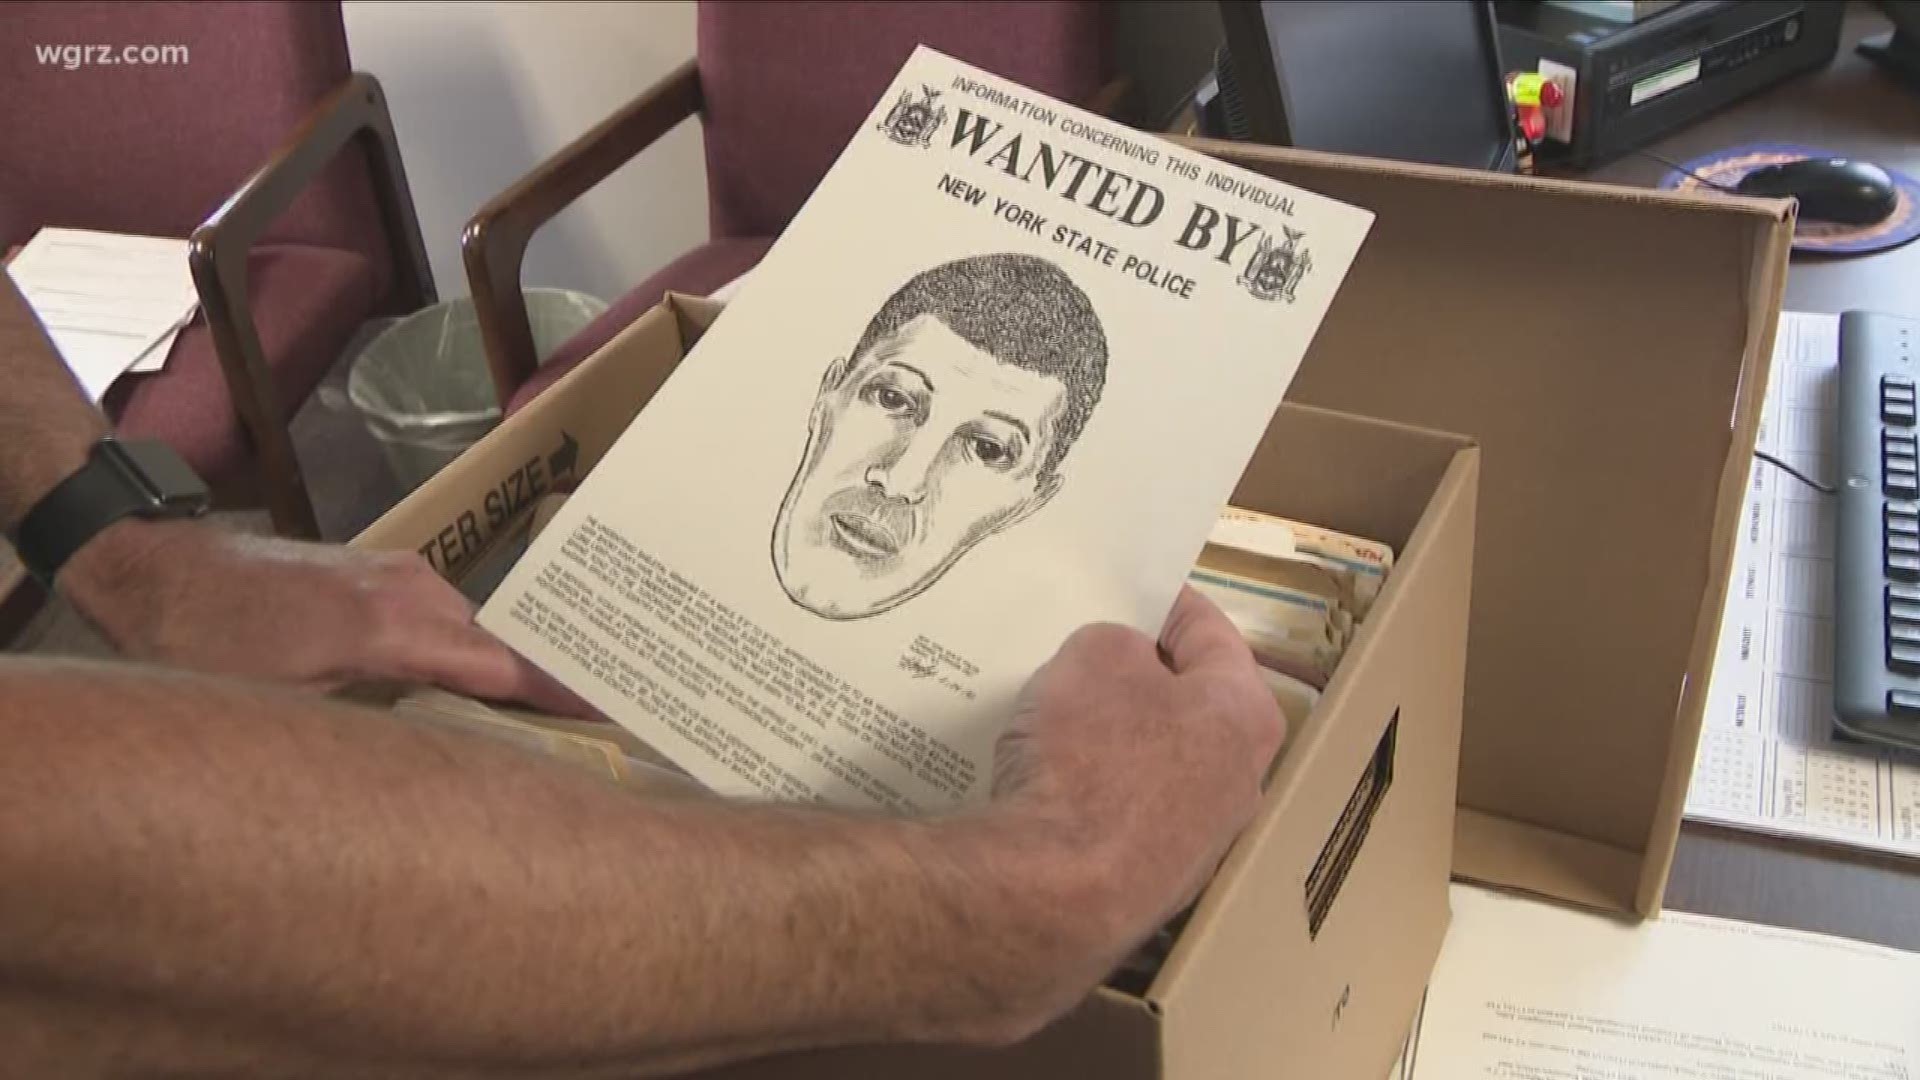 Nearly three decades ago, a man's remains were discovered in Niagara County and police are hoping DNA technology will help identify him.